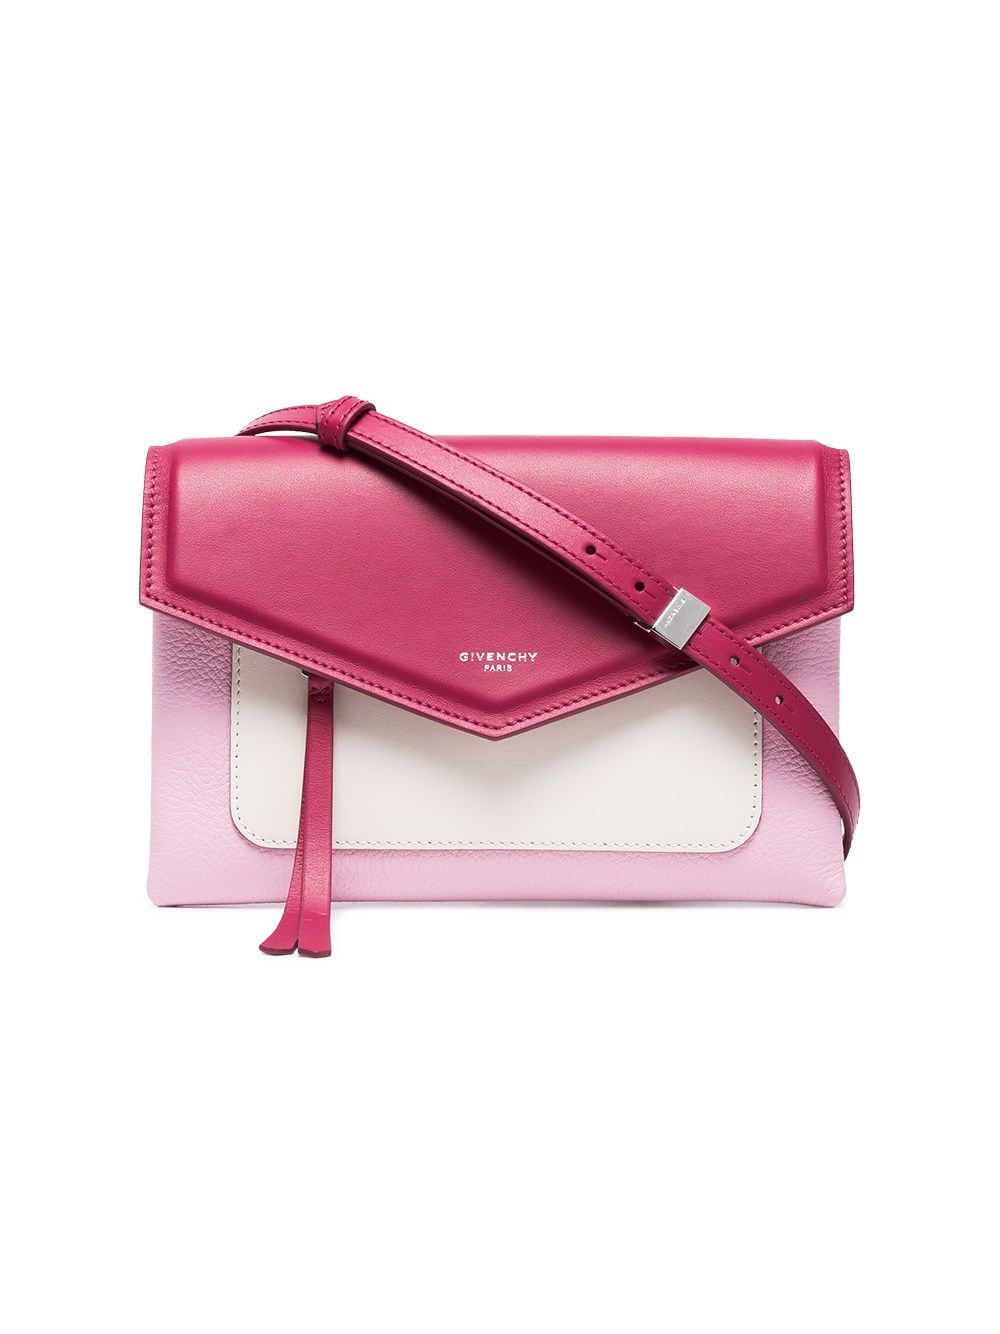 Givenchy bright pink Duetto leather cross-body bag - Pink & Purple | FarFetch US